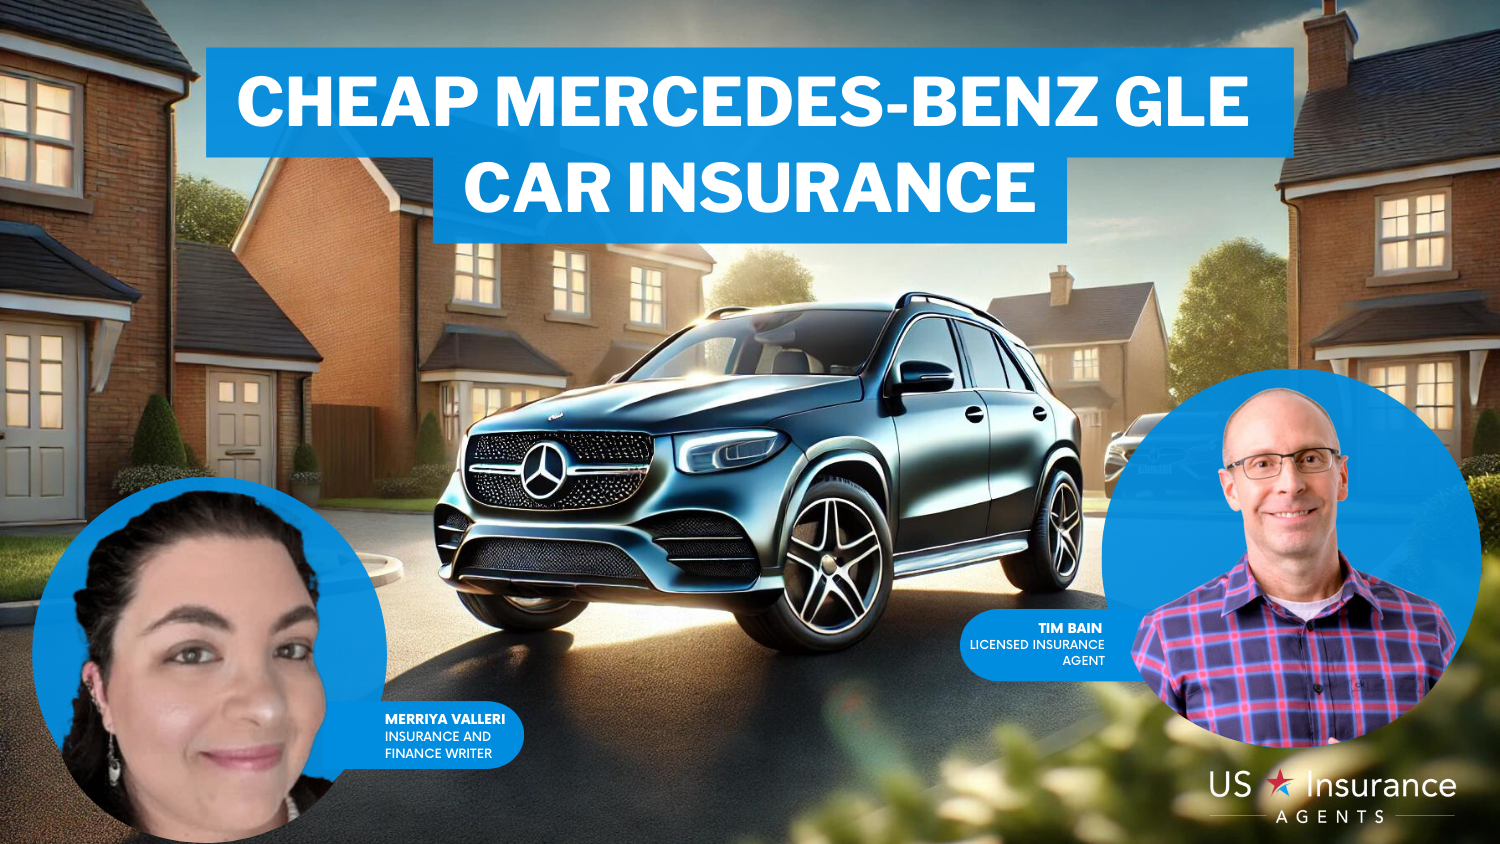 American Family, Travelers and Farmers: cheap Mercedes-Benz GLE car insurance